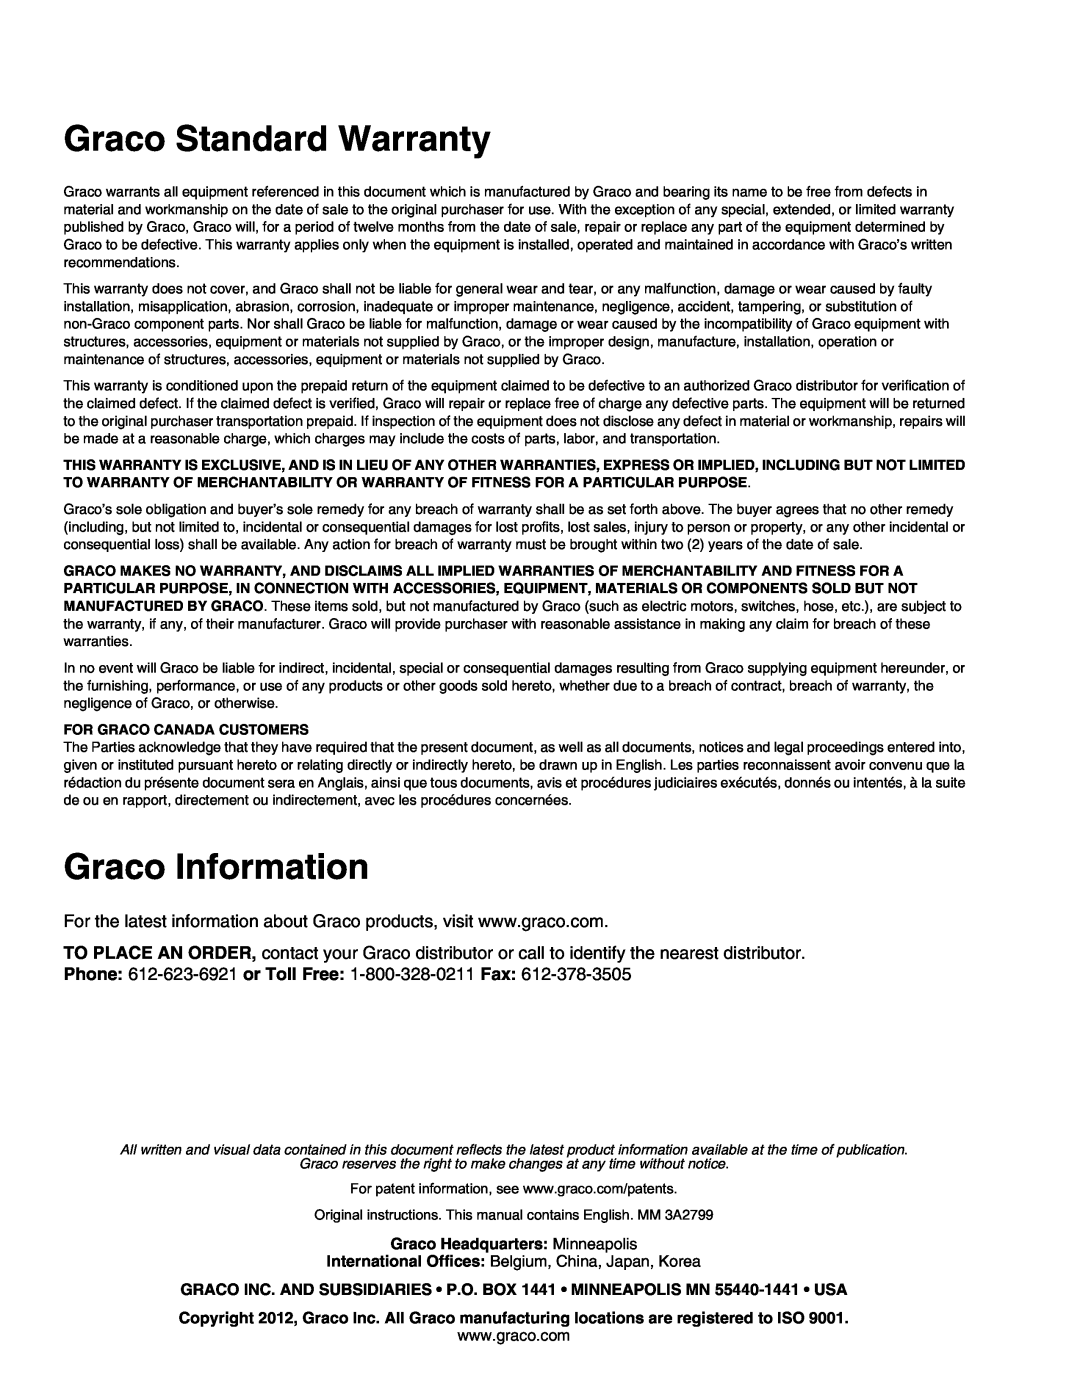 Graco Series A, 262854 important safety instructions Graco Standard Warranty, Graco Information 